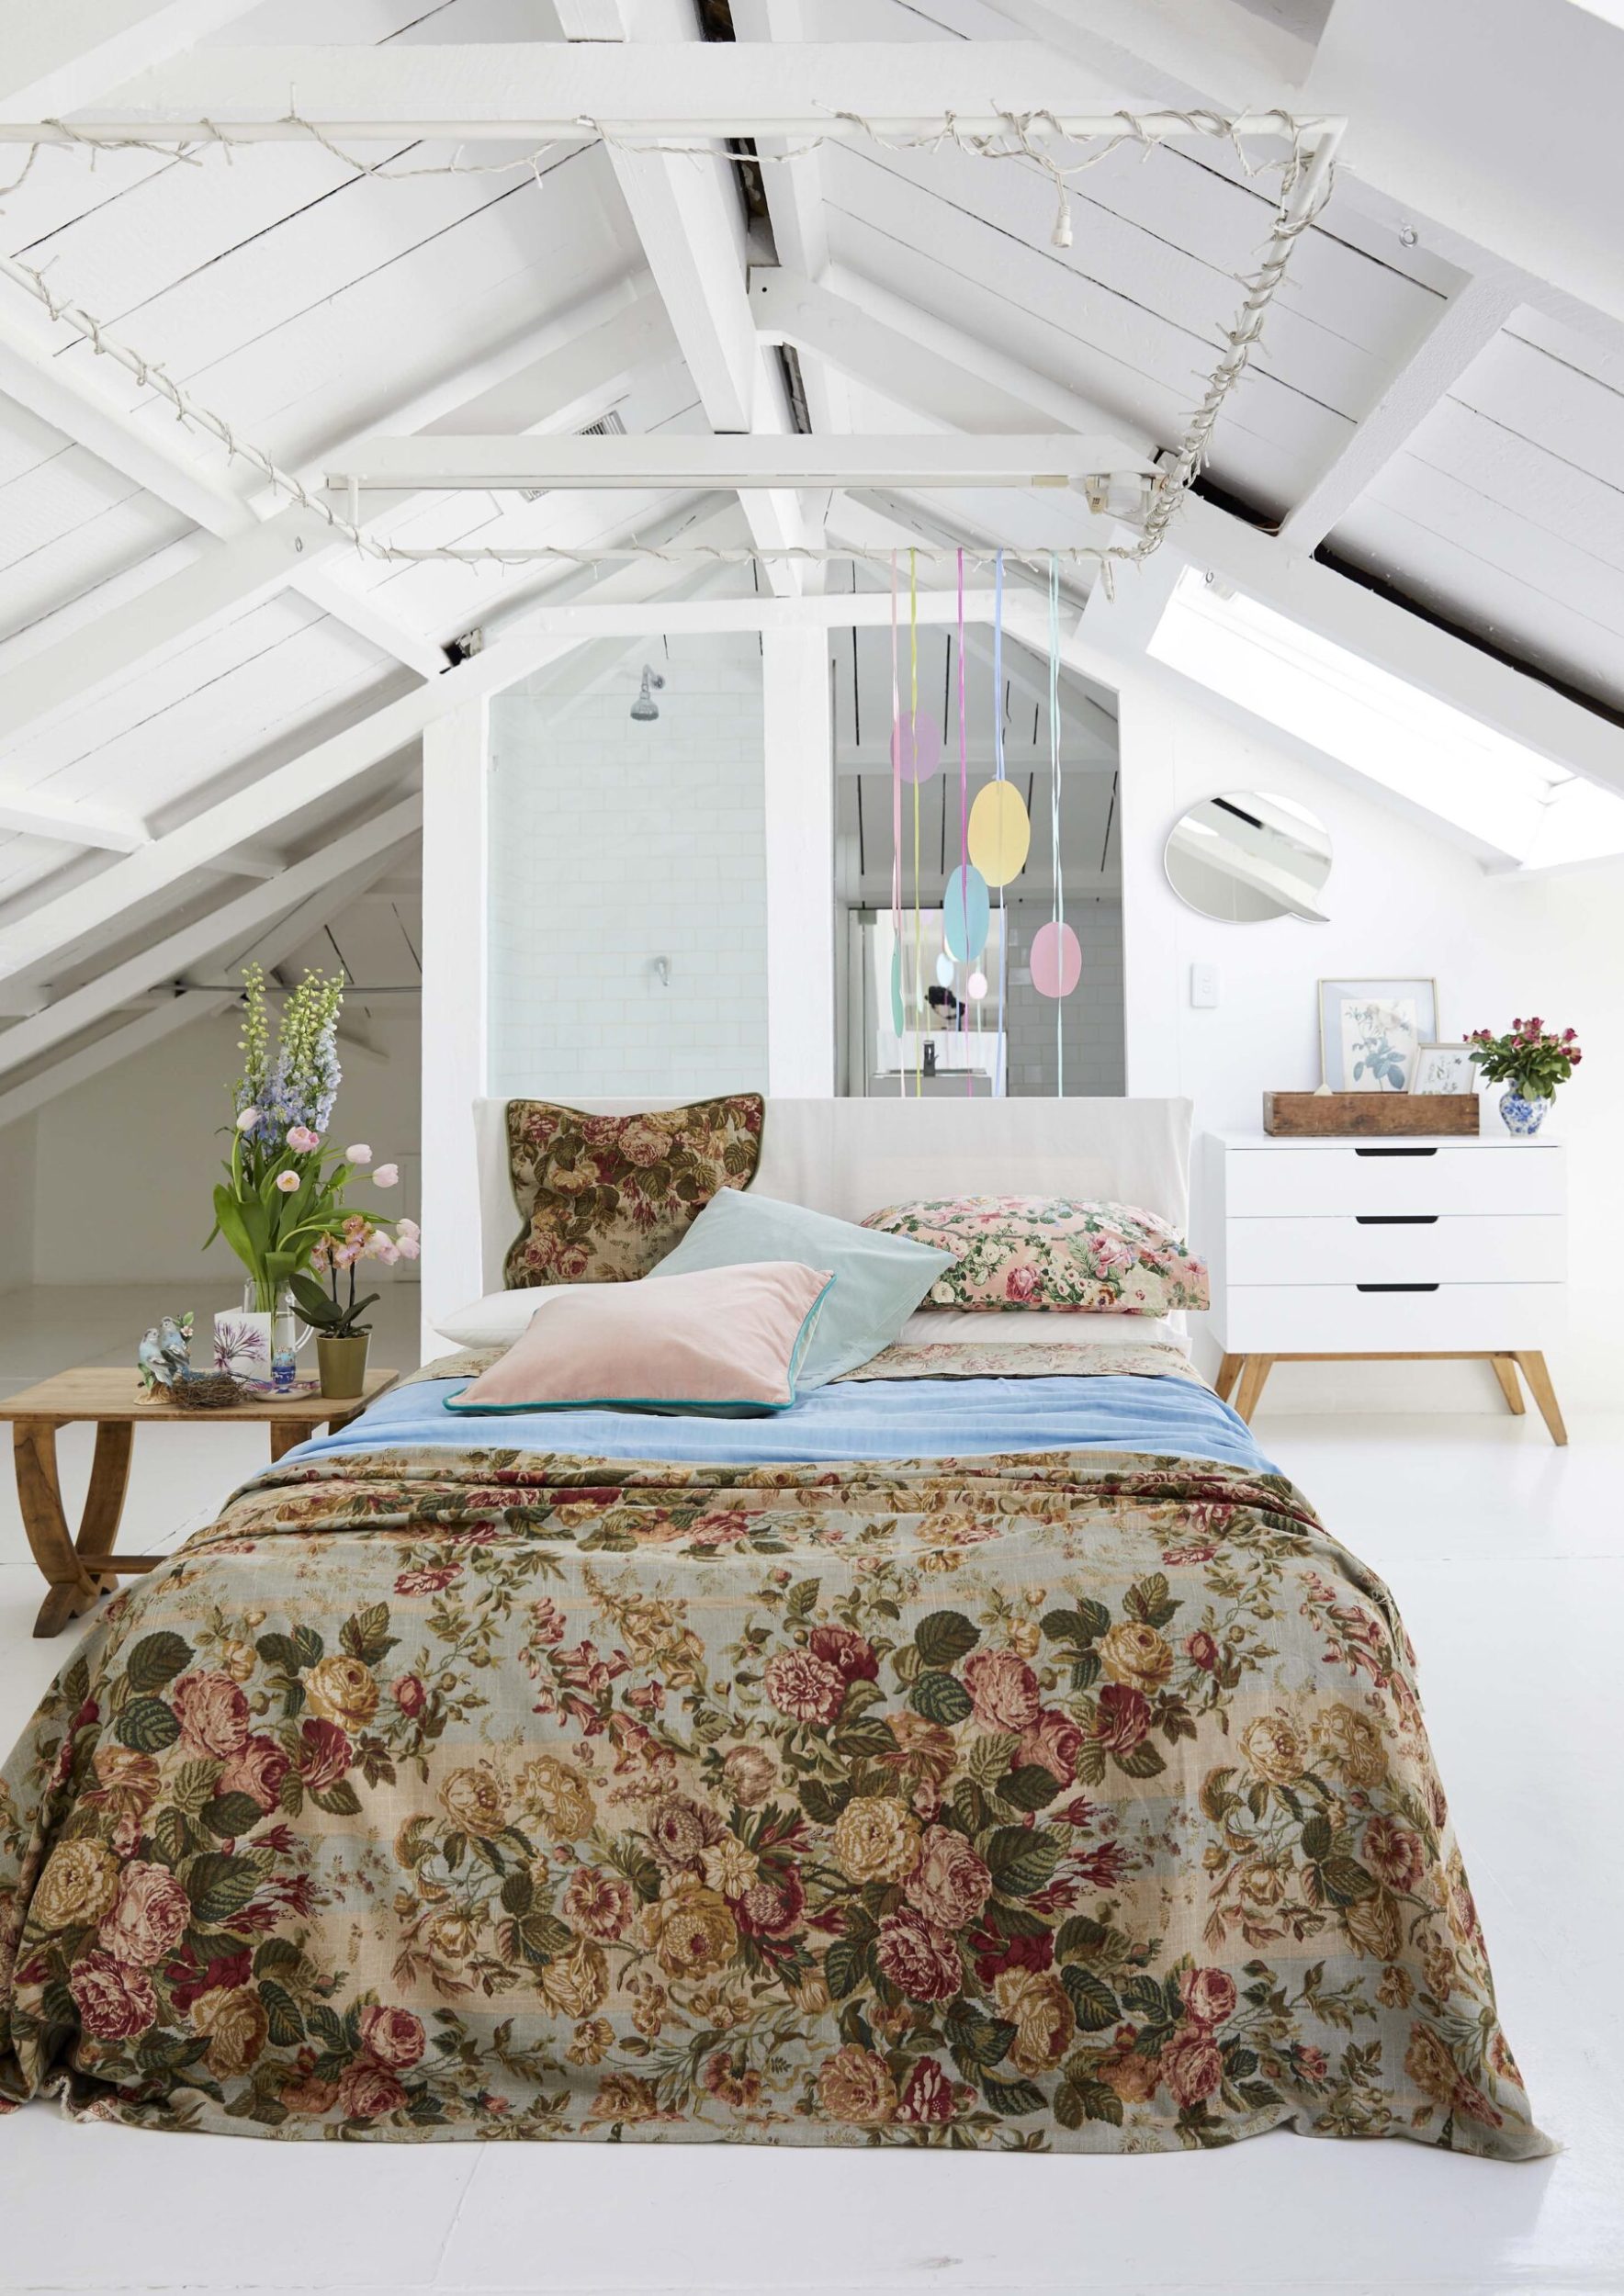 A bed in the middle of a white room with a floral bedspread